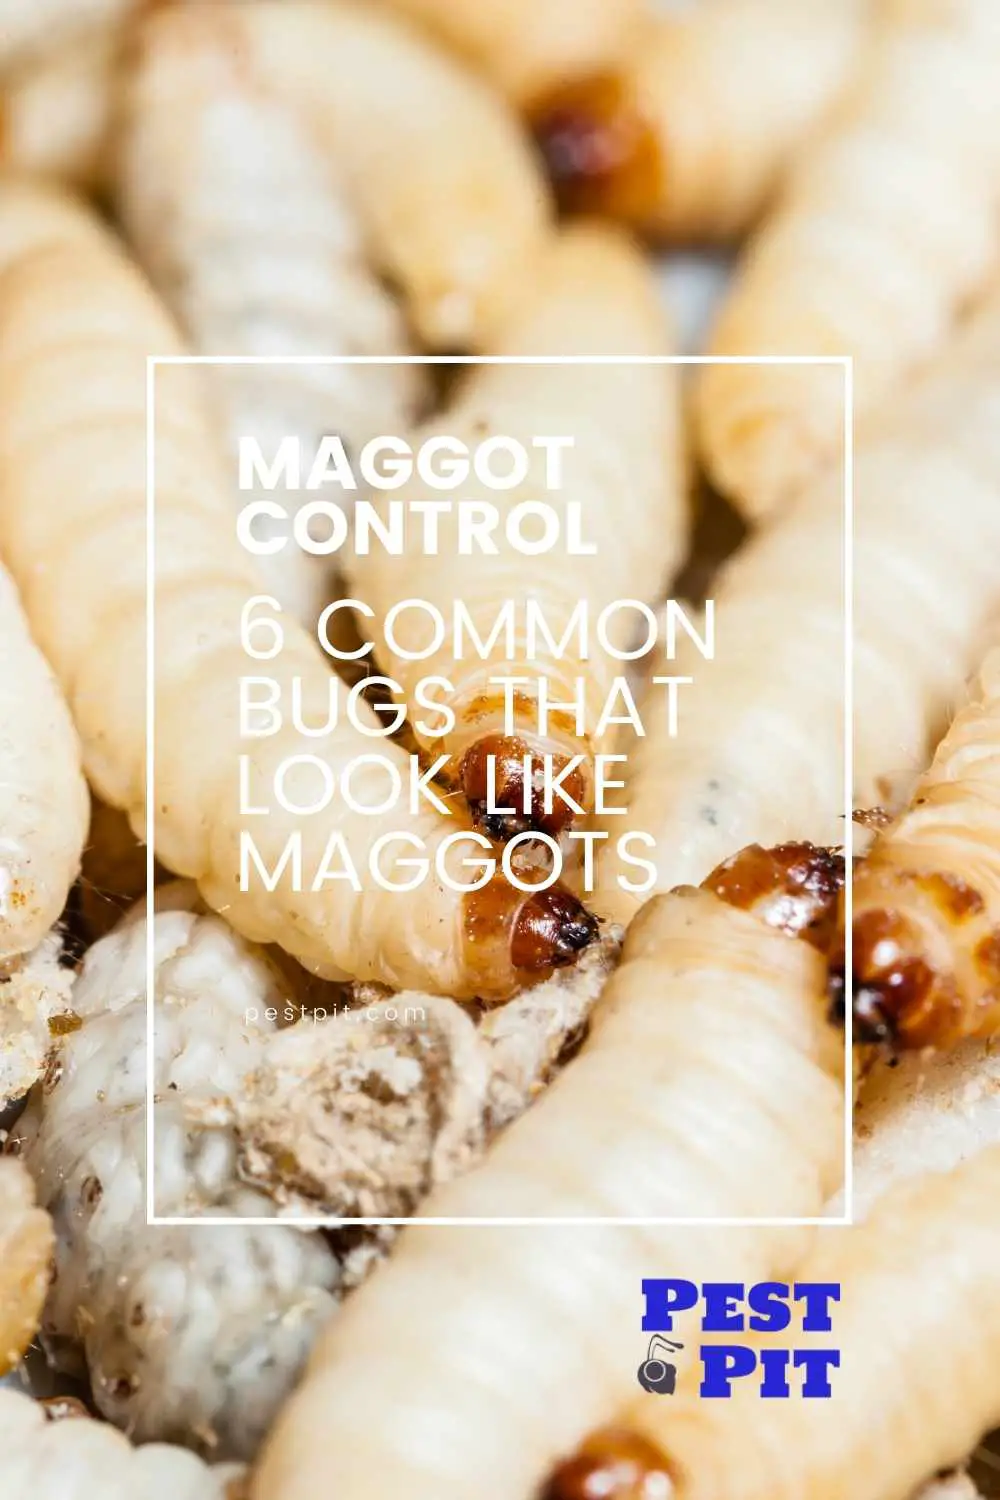 6 Common Bugs That Look Like Maggots